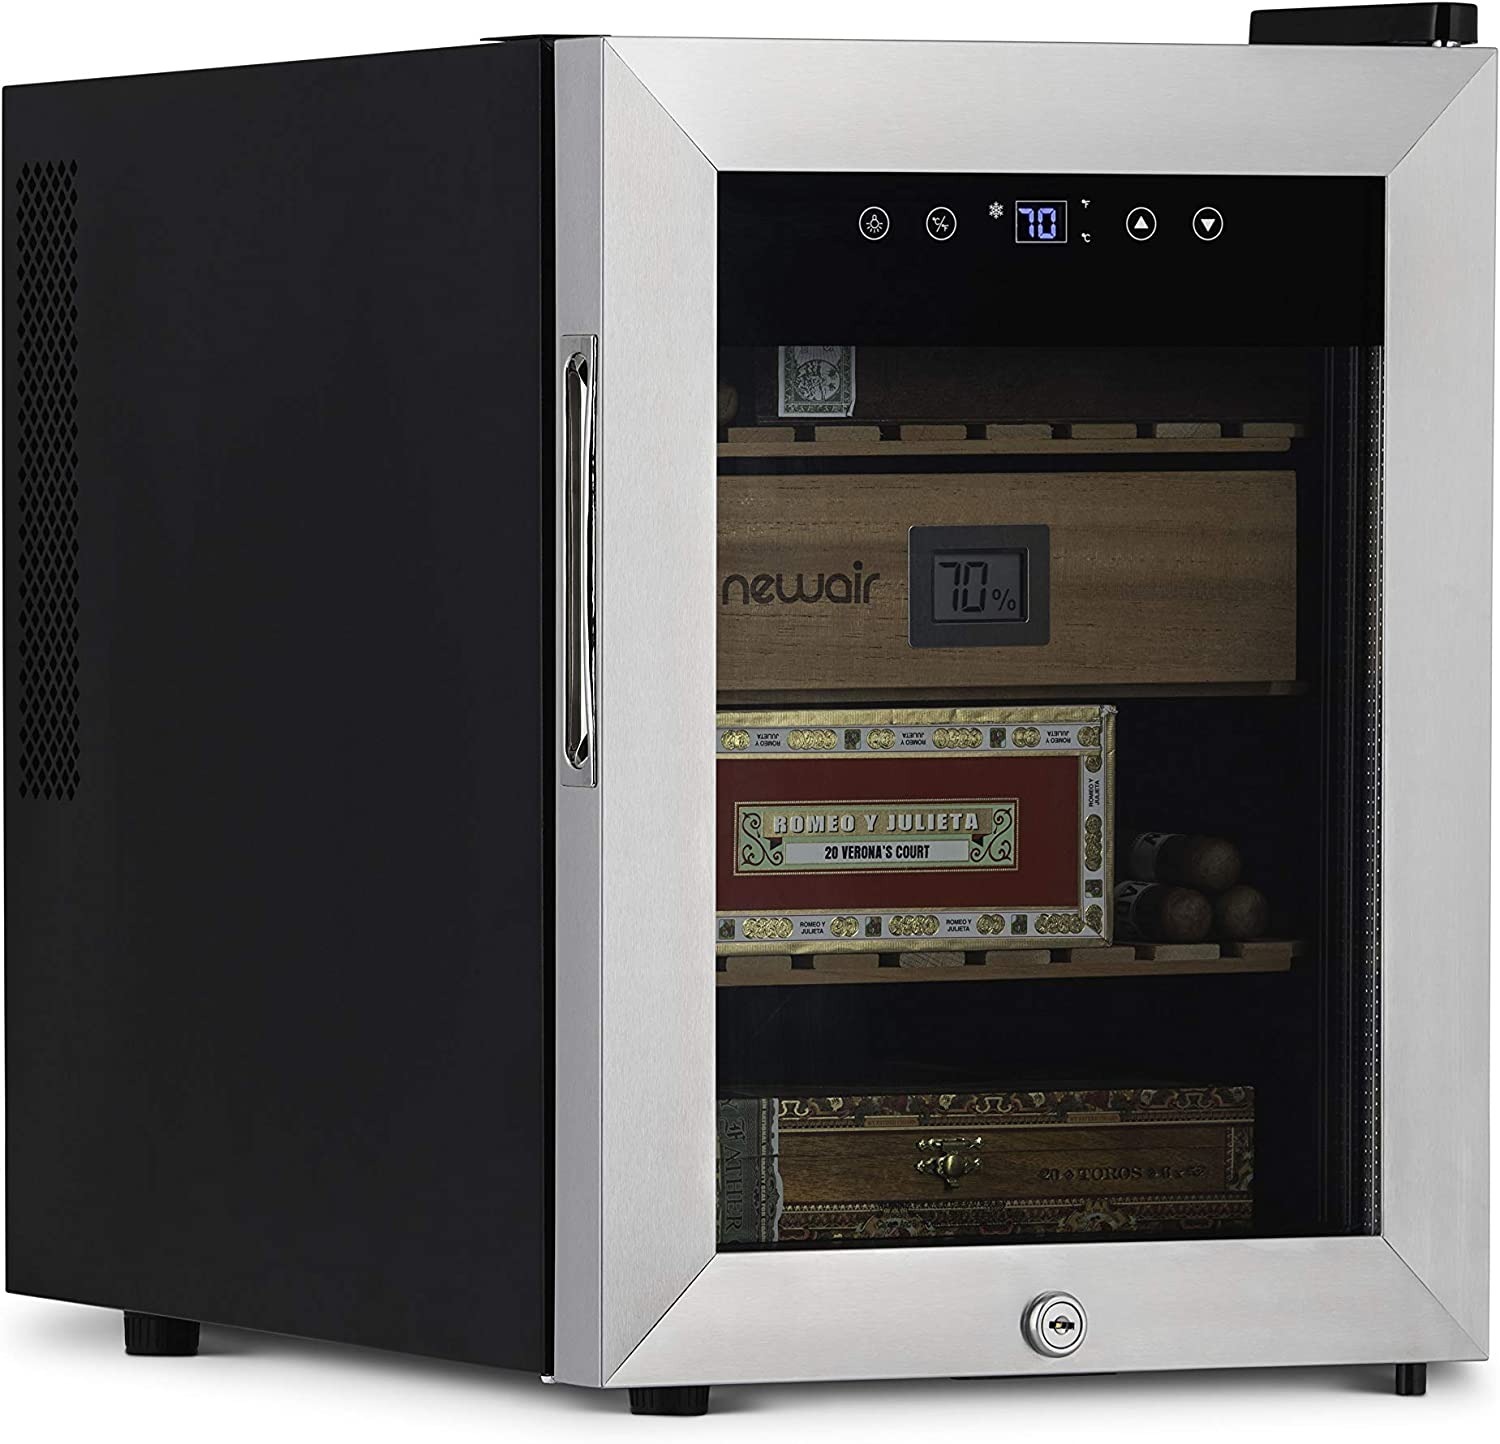 250 Count  Newair Electric Cigar Humidor Wineador (Factory Reconditioned) $230 + Free Shipping w/ Prime